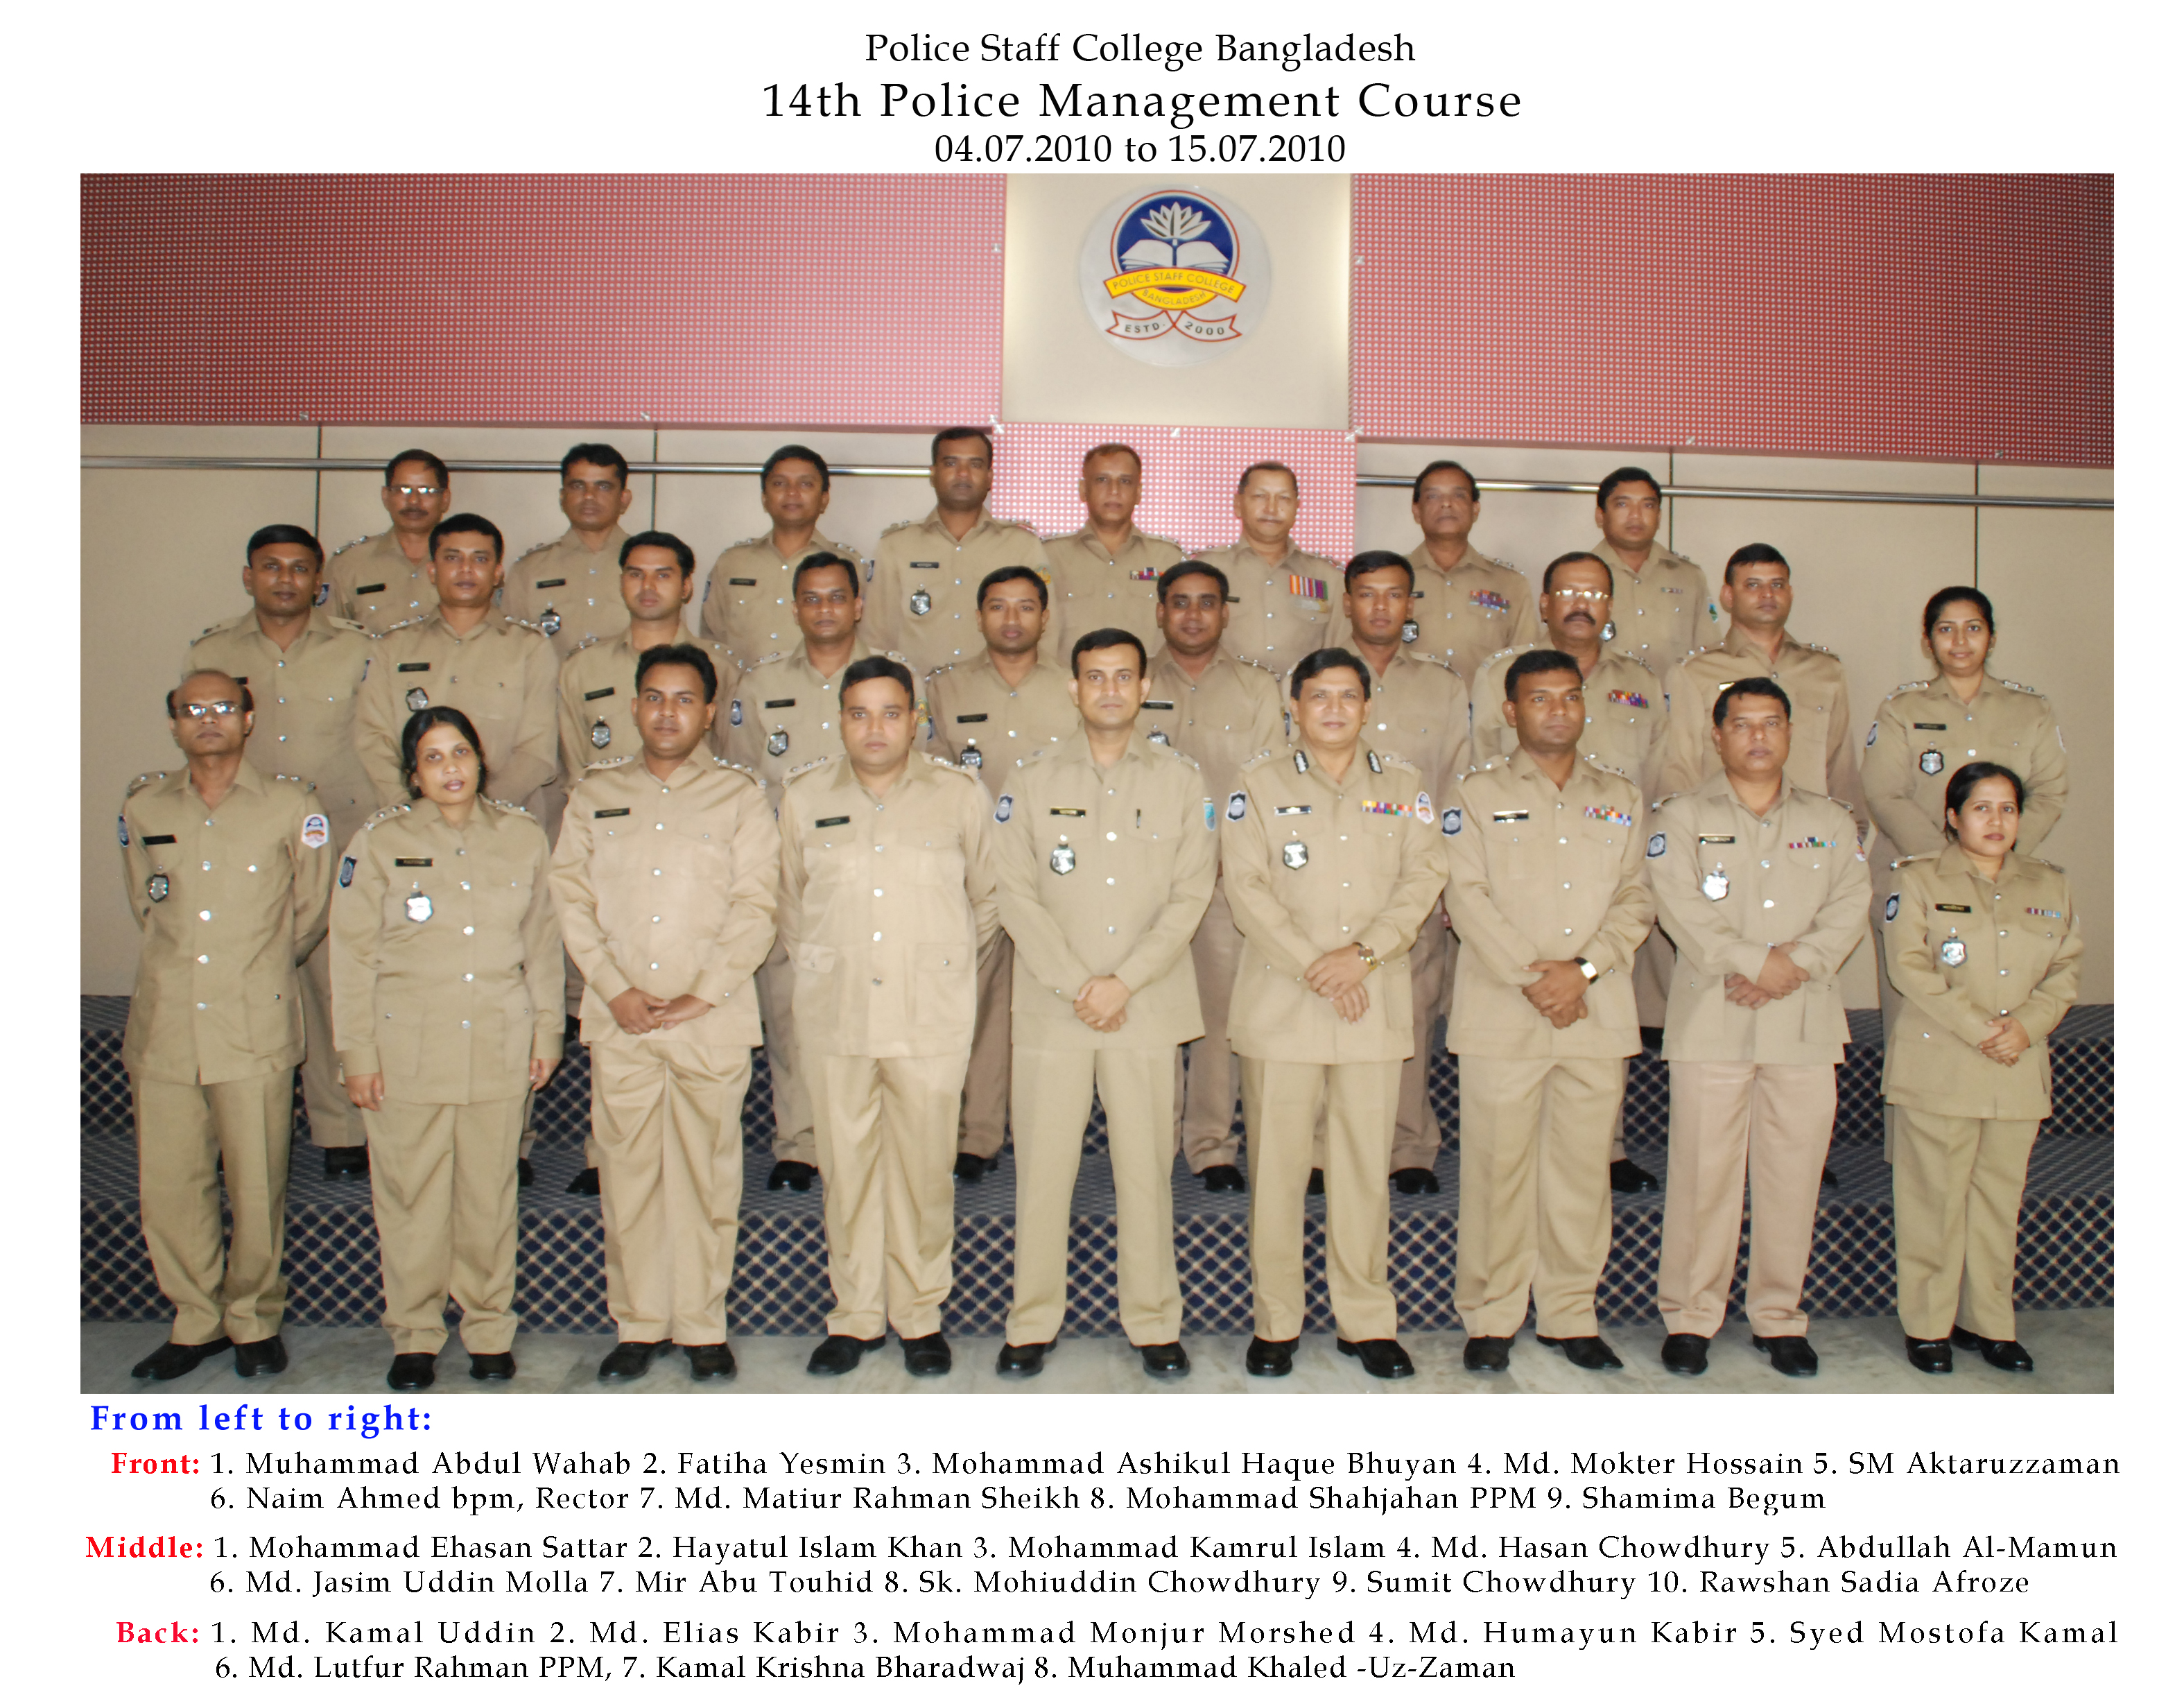 Participant of 14th Police Management Certificate Course. 